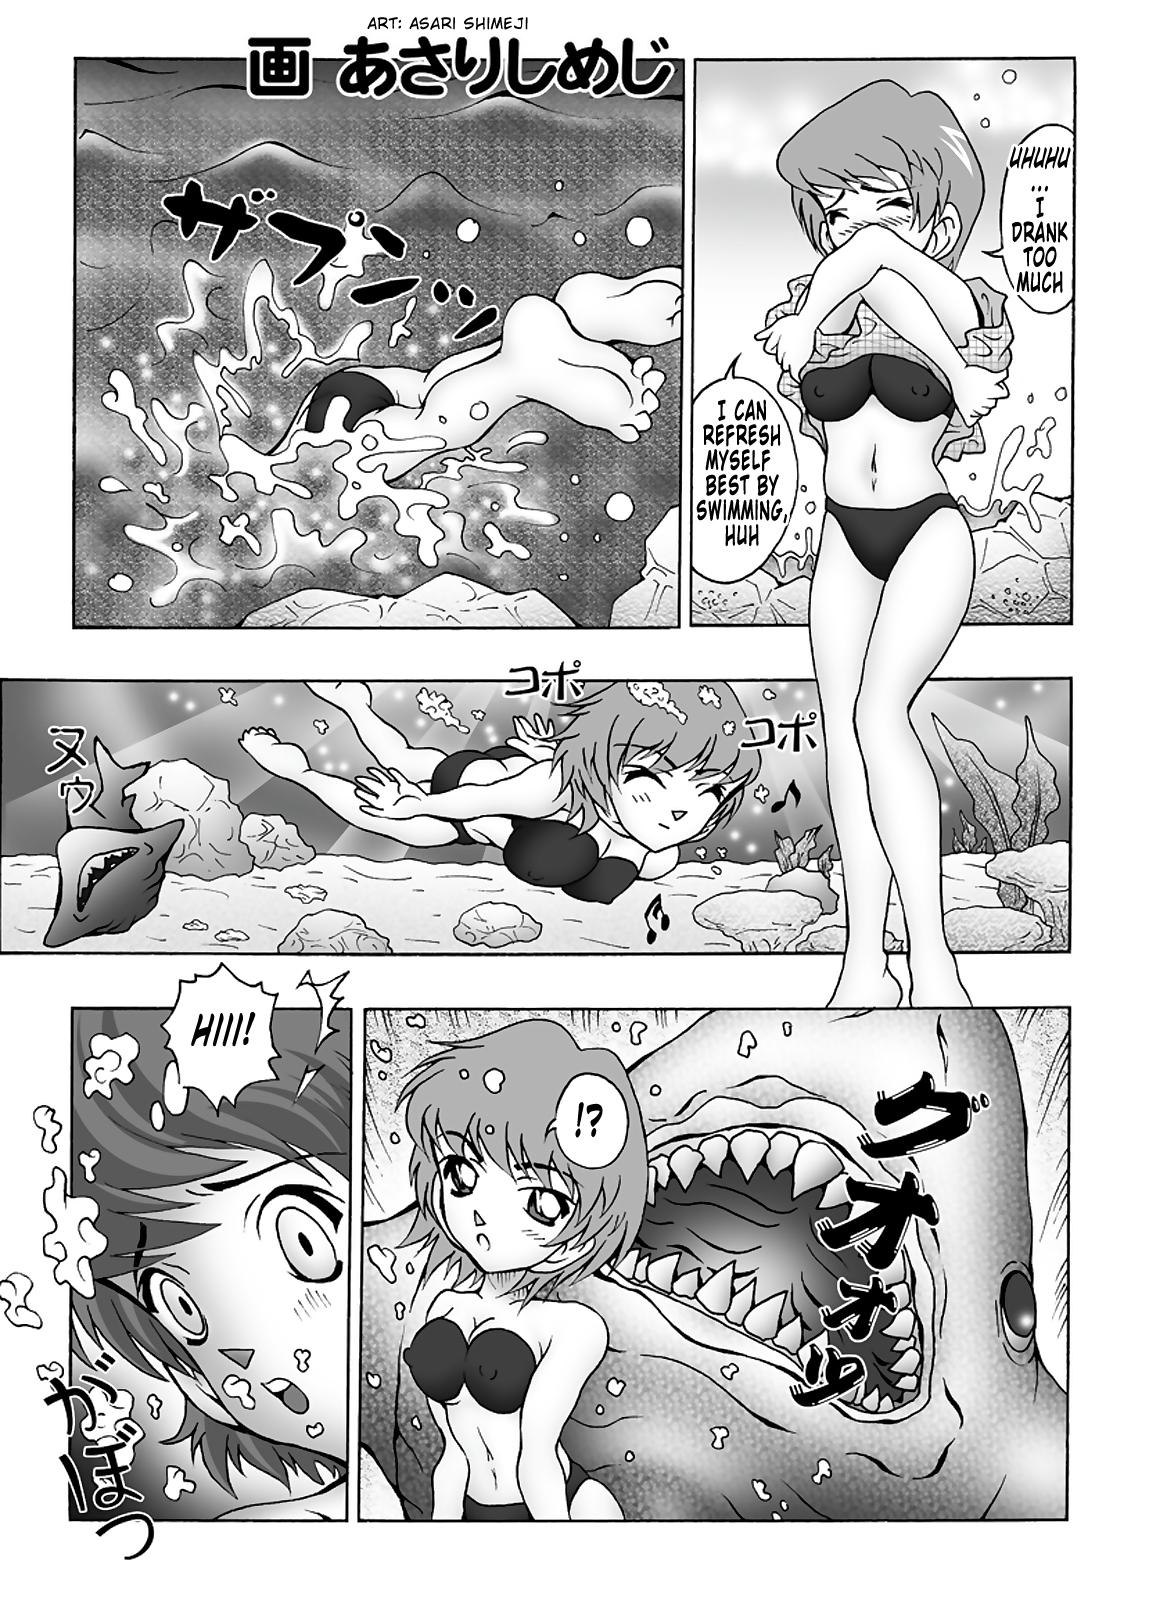 Fisting Bumbling Detective Conan - File 9: The Mystery Of The Jaws Crime - Detective conan German - Page 4